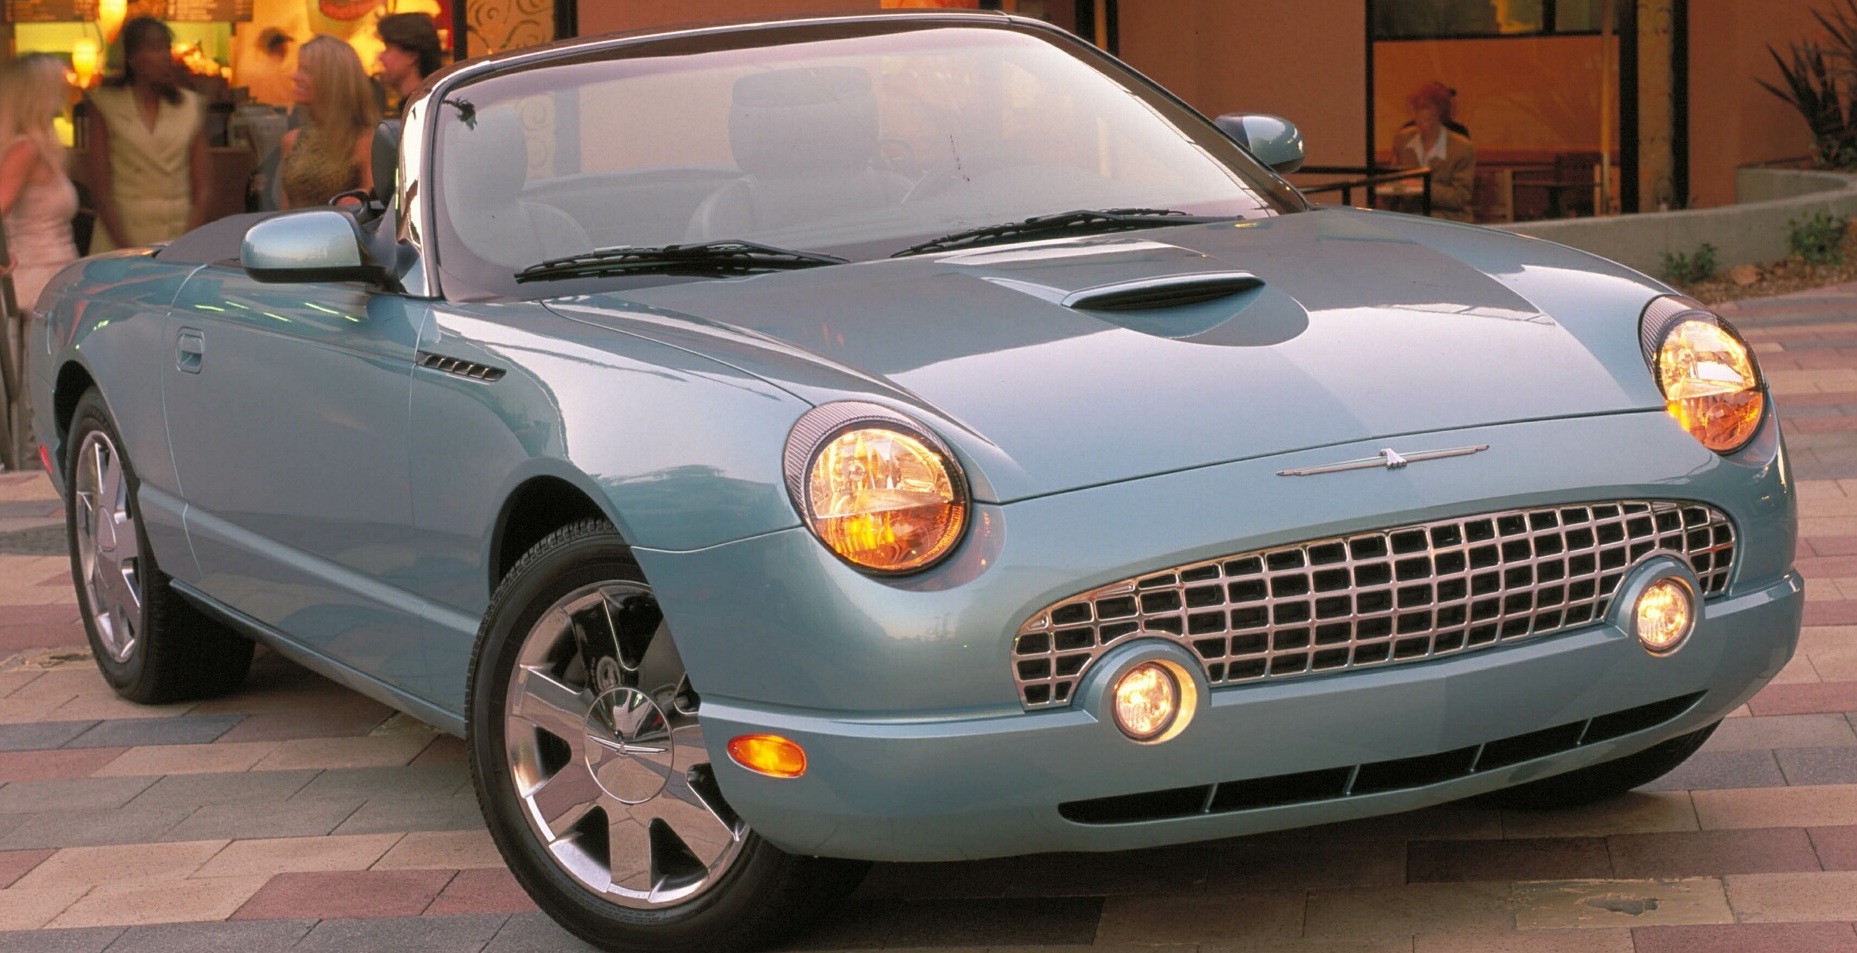 Is Now a Good Time to Buy a 2002-2005 Thunderbird? -